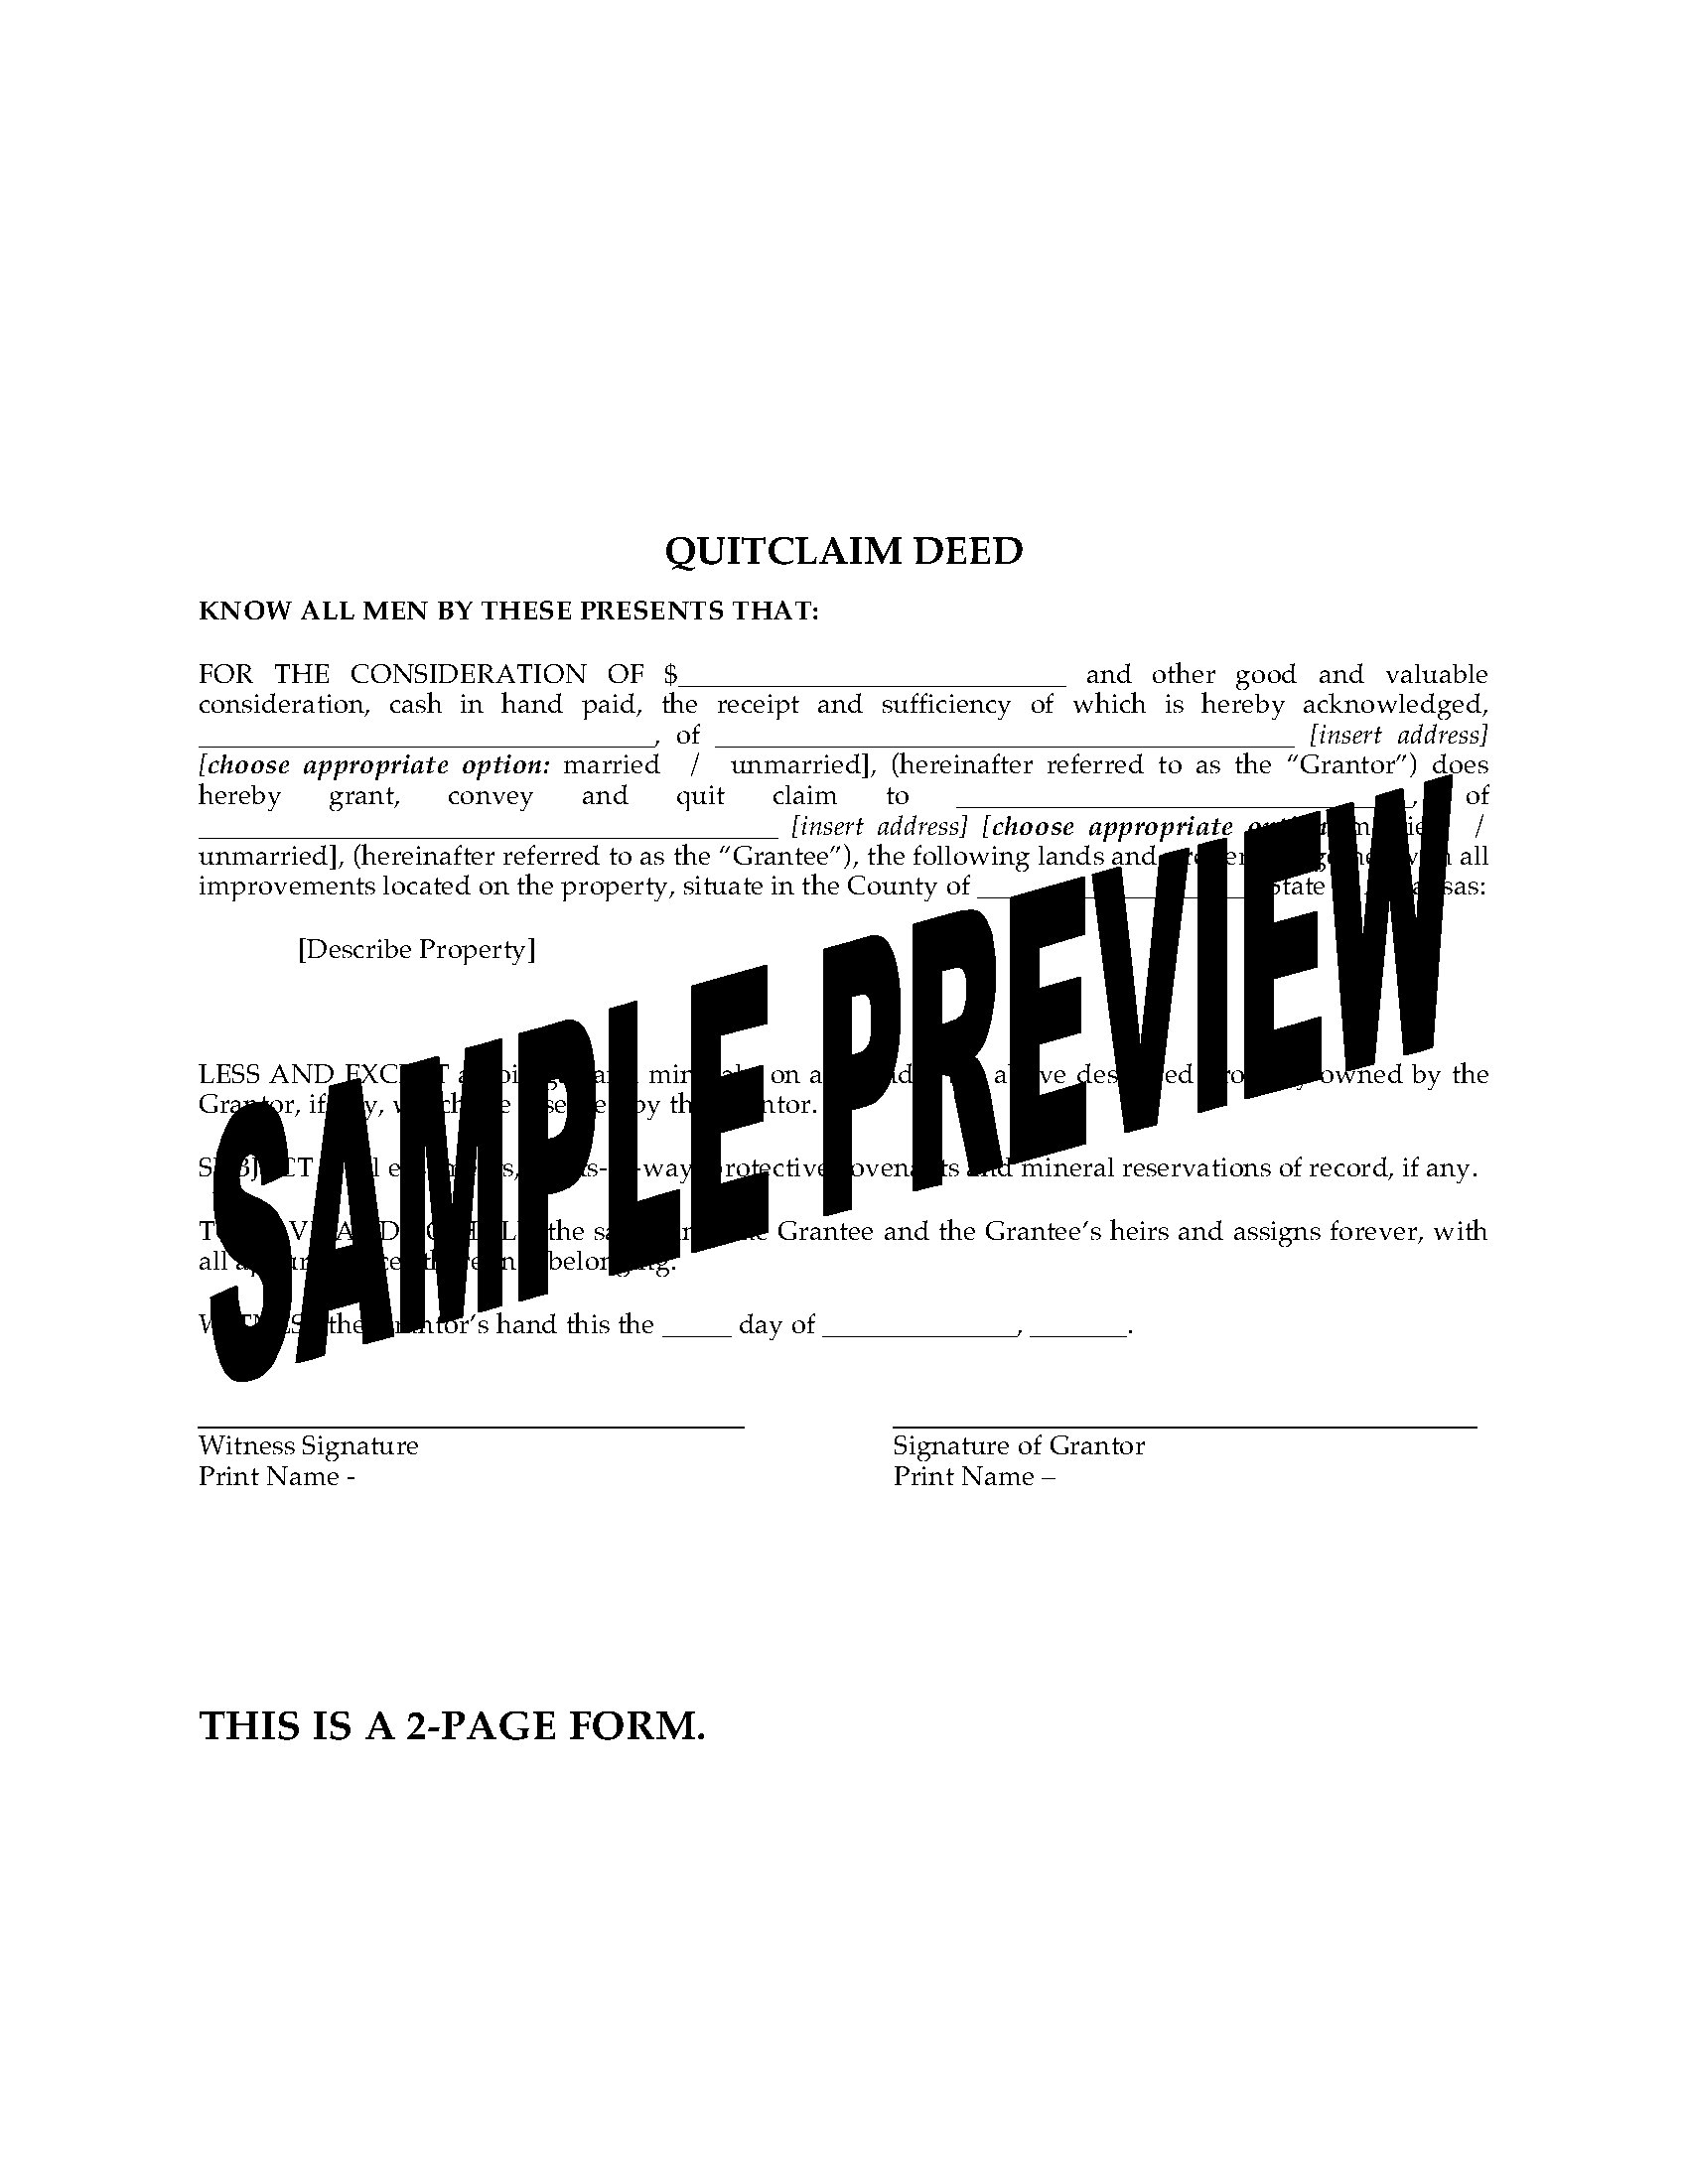 arkansas-quitclaim-deed-legal-forms-and-business-templates-megadox